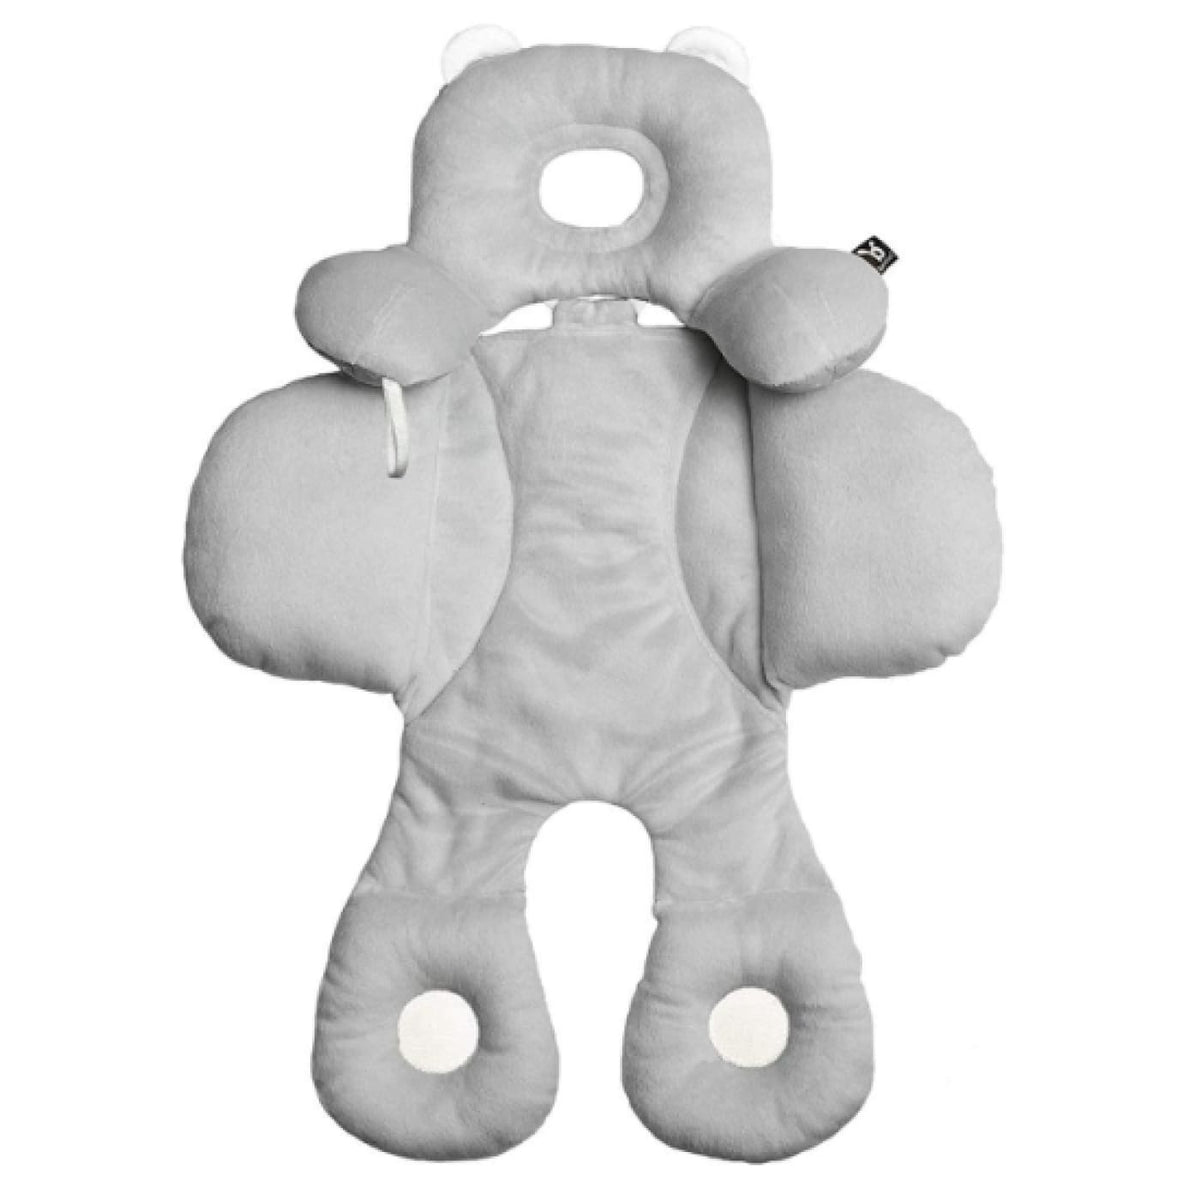 Benbat Reversible Body Support - Grey 0-12M - 0-12M / Grey - CAR SEATS - HEAD SUPPORTS/HARNESS COVERS